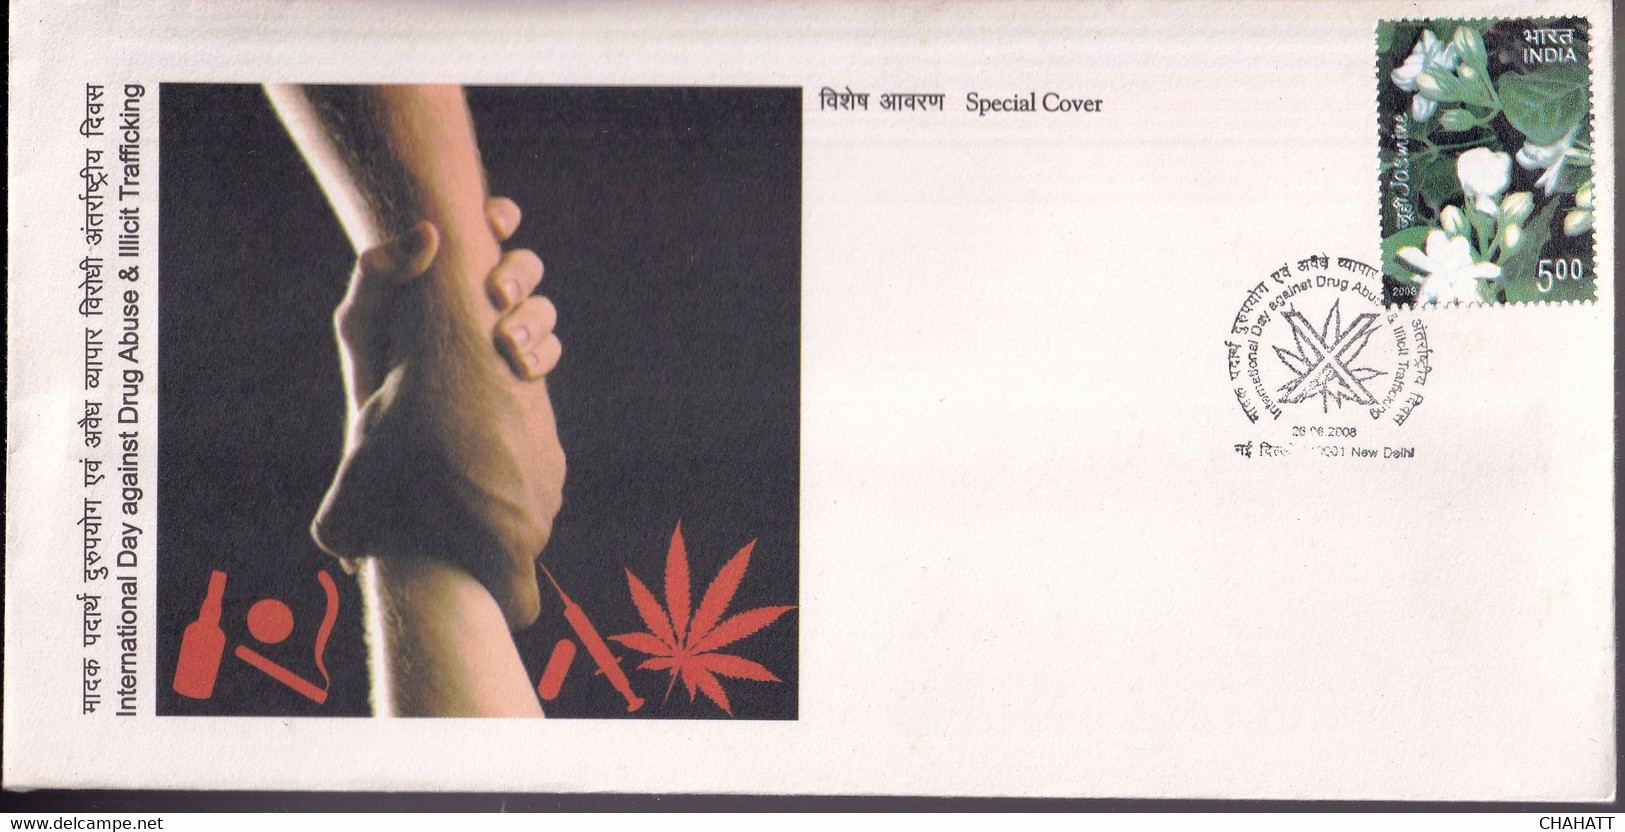 DRUG ABUSE & ILLICIT TRAFFICKING - SPECIAL COVER- INDIA-2008- BX2-11 - Drugs